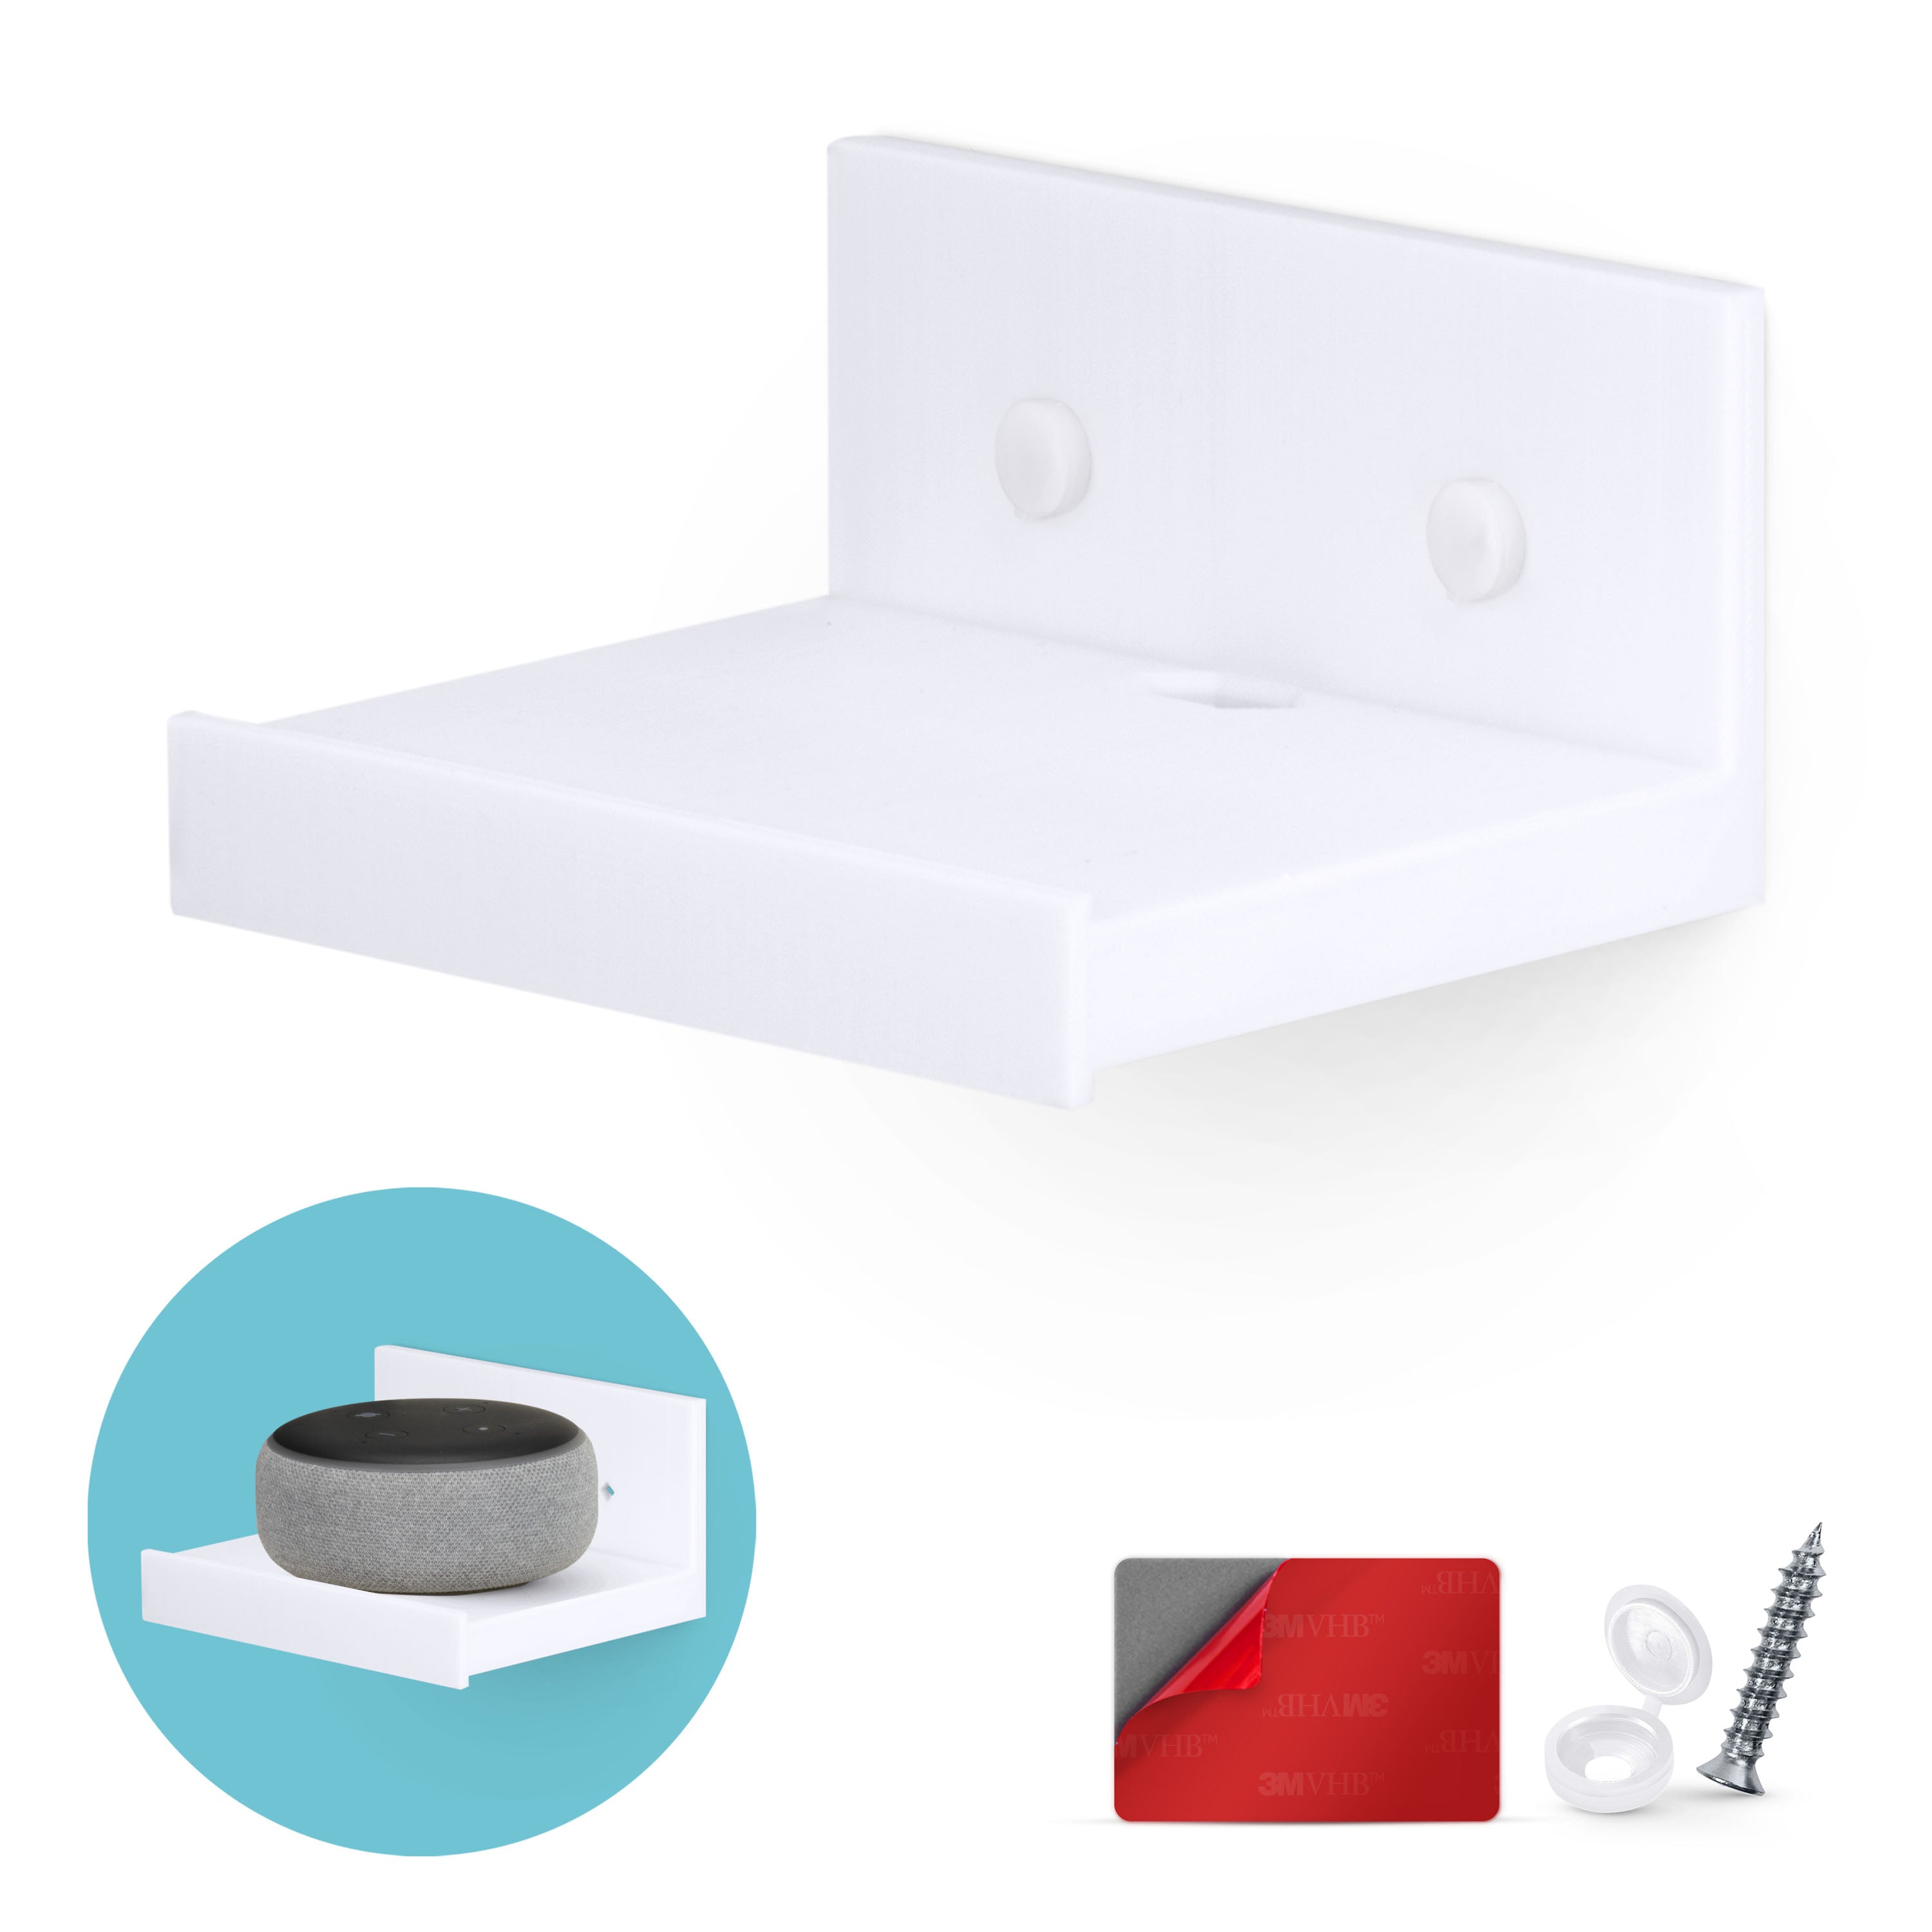 5” Small Floating Shelf, Adhesive & Screw in, for Bluetooth Speakers, Cameras, Plants, Toys, Books & More, Easy to Install Shelves Shelf SF2105